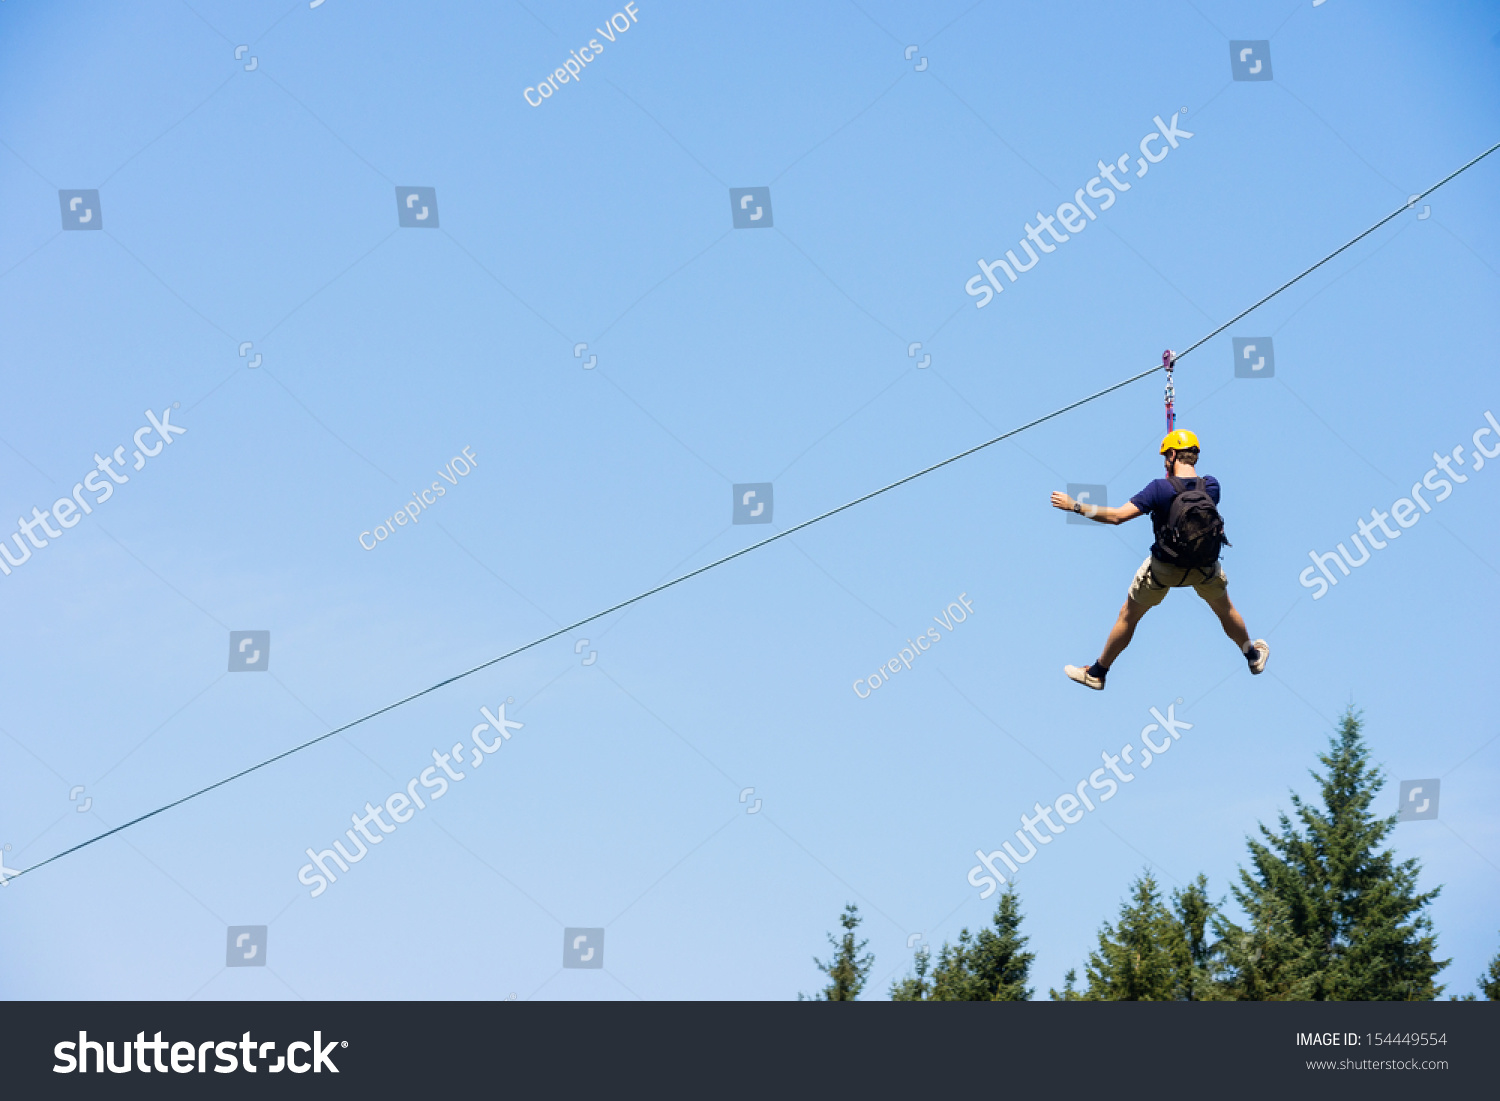 Rear view of young man riding on zip line against blue sky #154449554